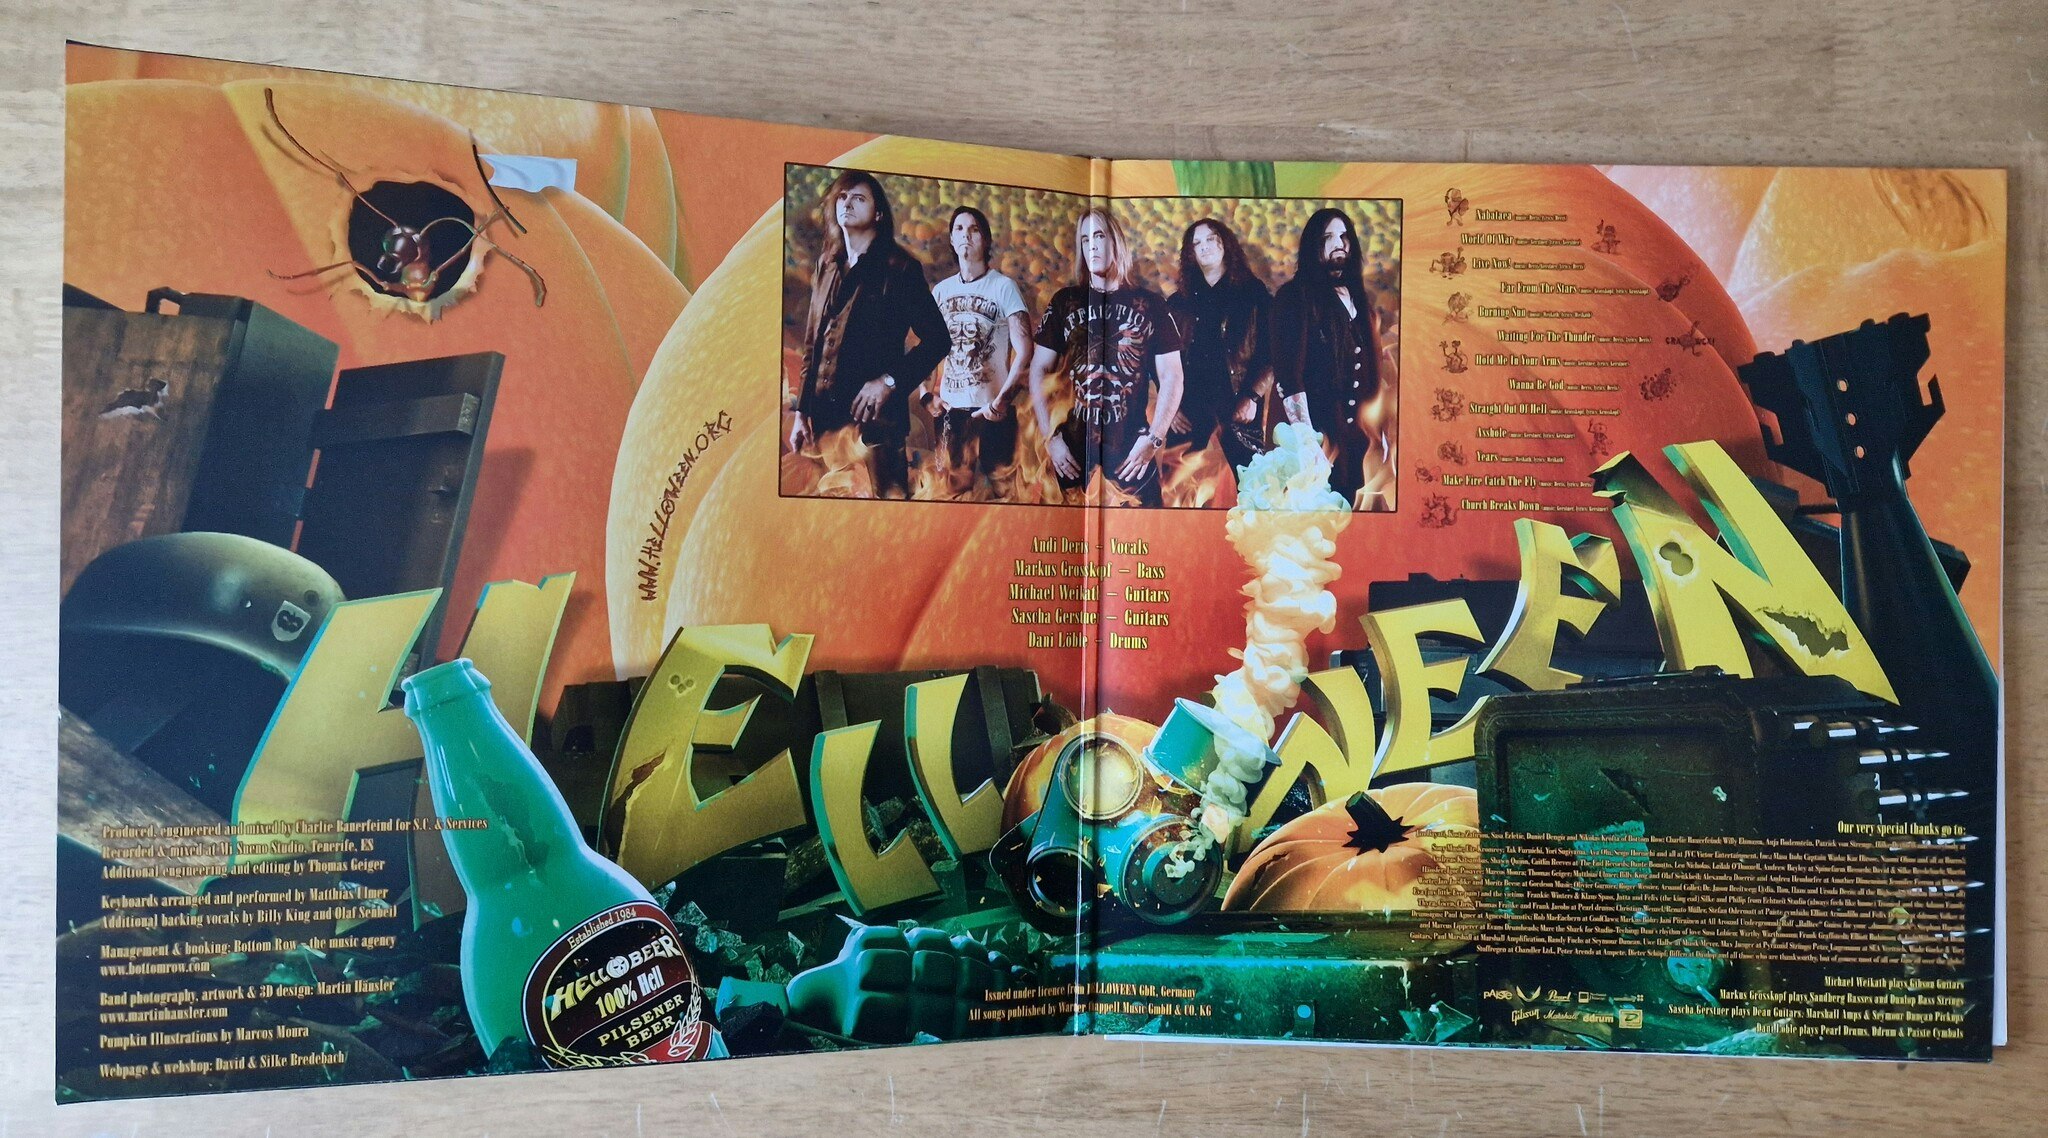 Helloween, Straight out of hell. Vinyl 2LP